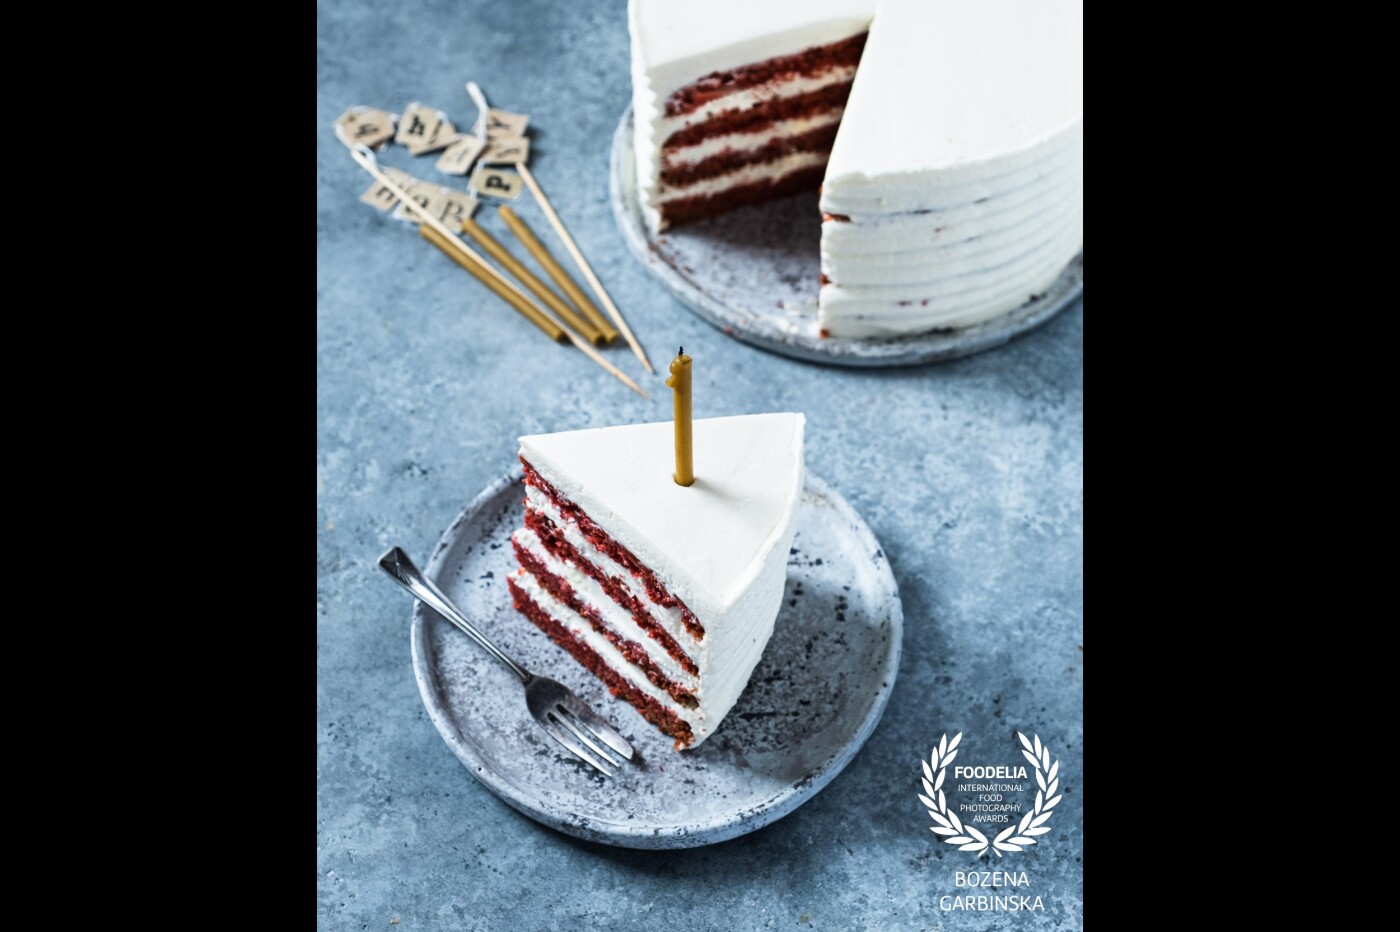 Delicious gluten-free red velvet cake. It can be your birthday cake. I replaced some of the sugar with tagatose.<br />
Body: Fuji x-t3<br />
Lens: Fujinon 16-55 mm